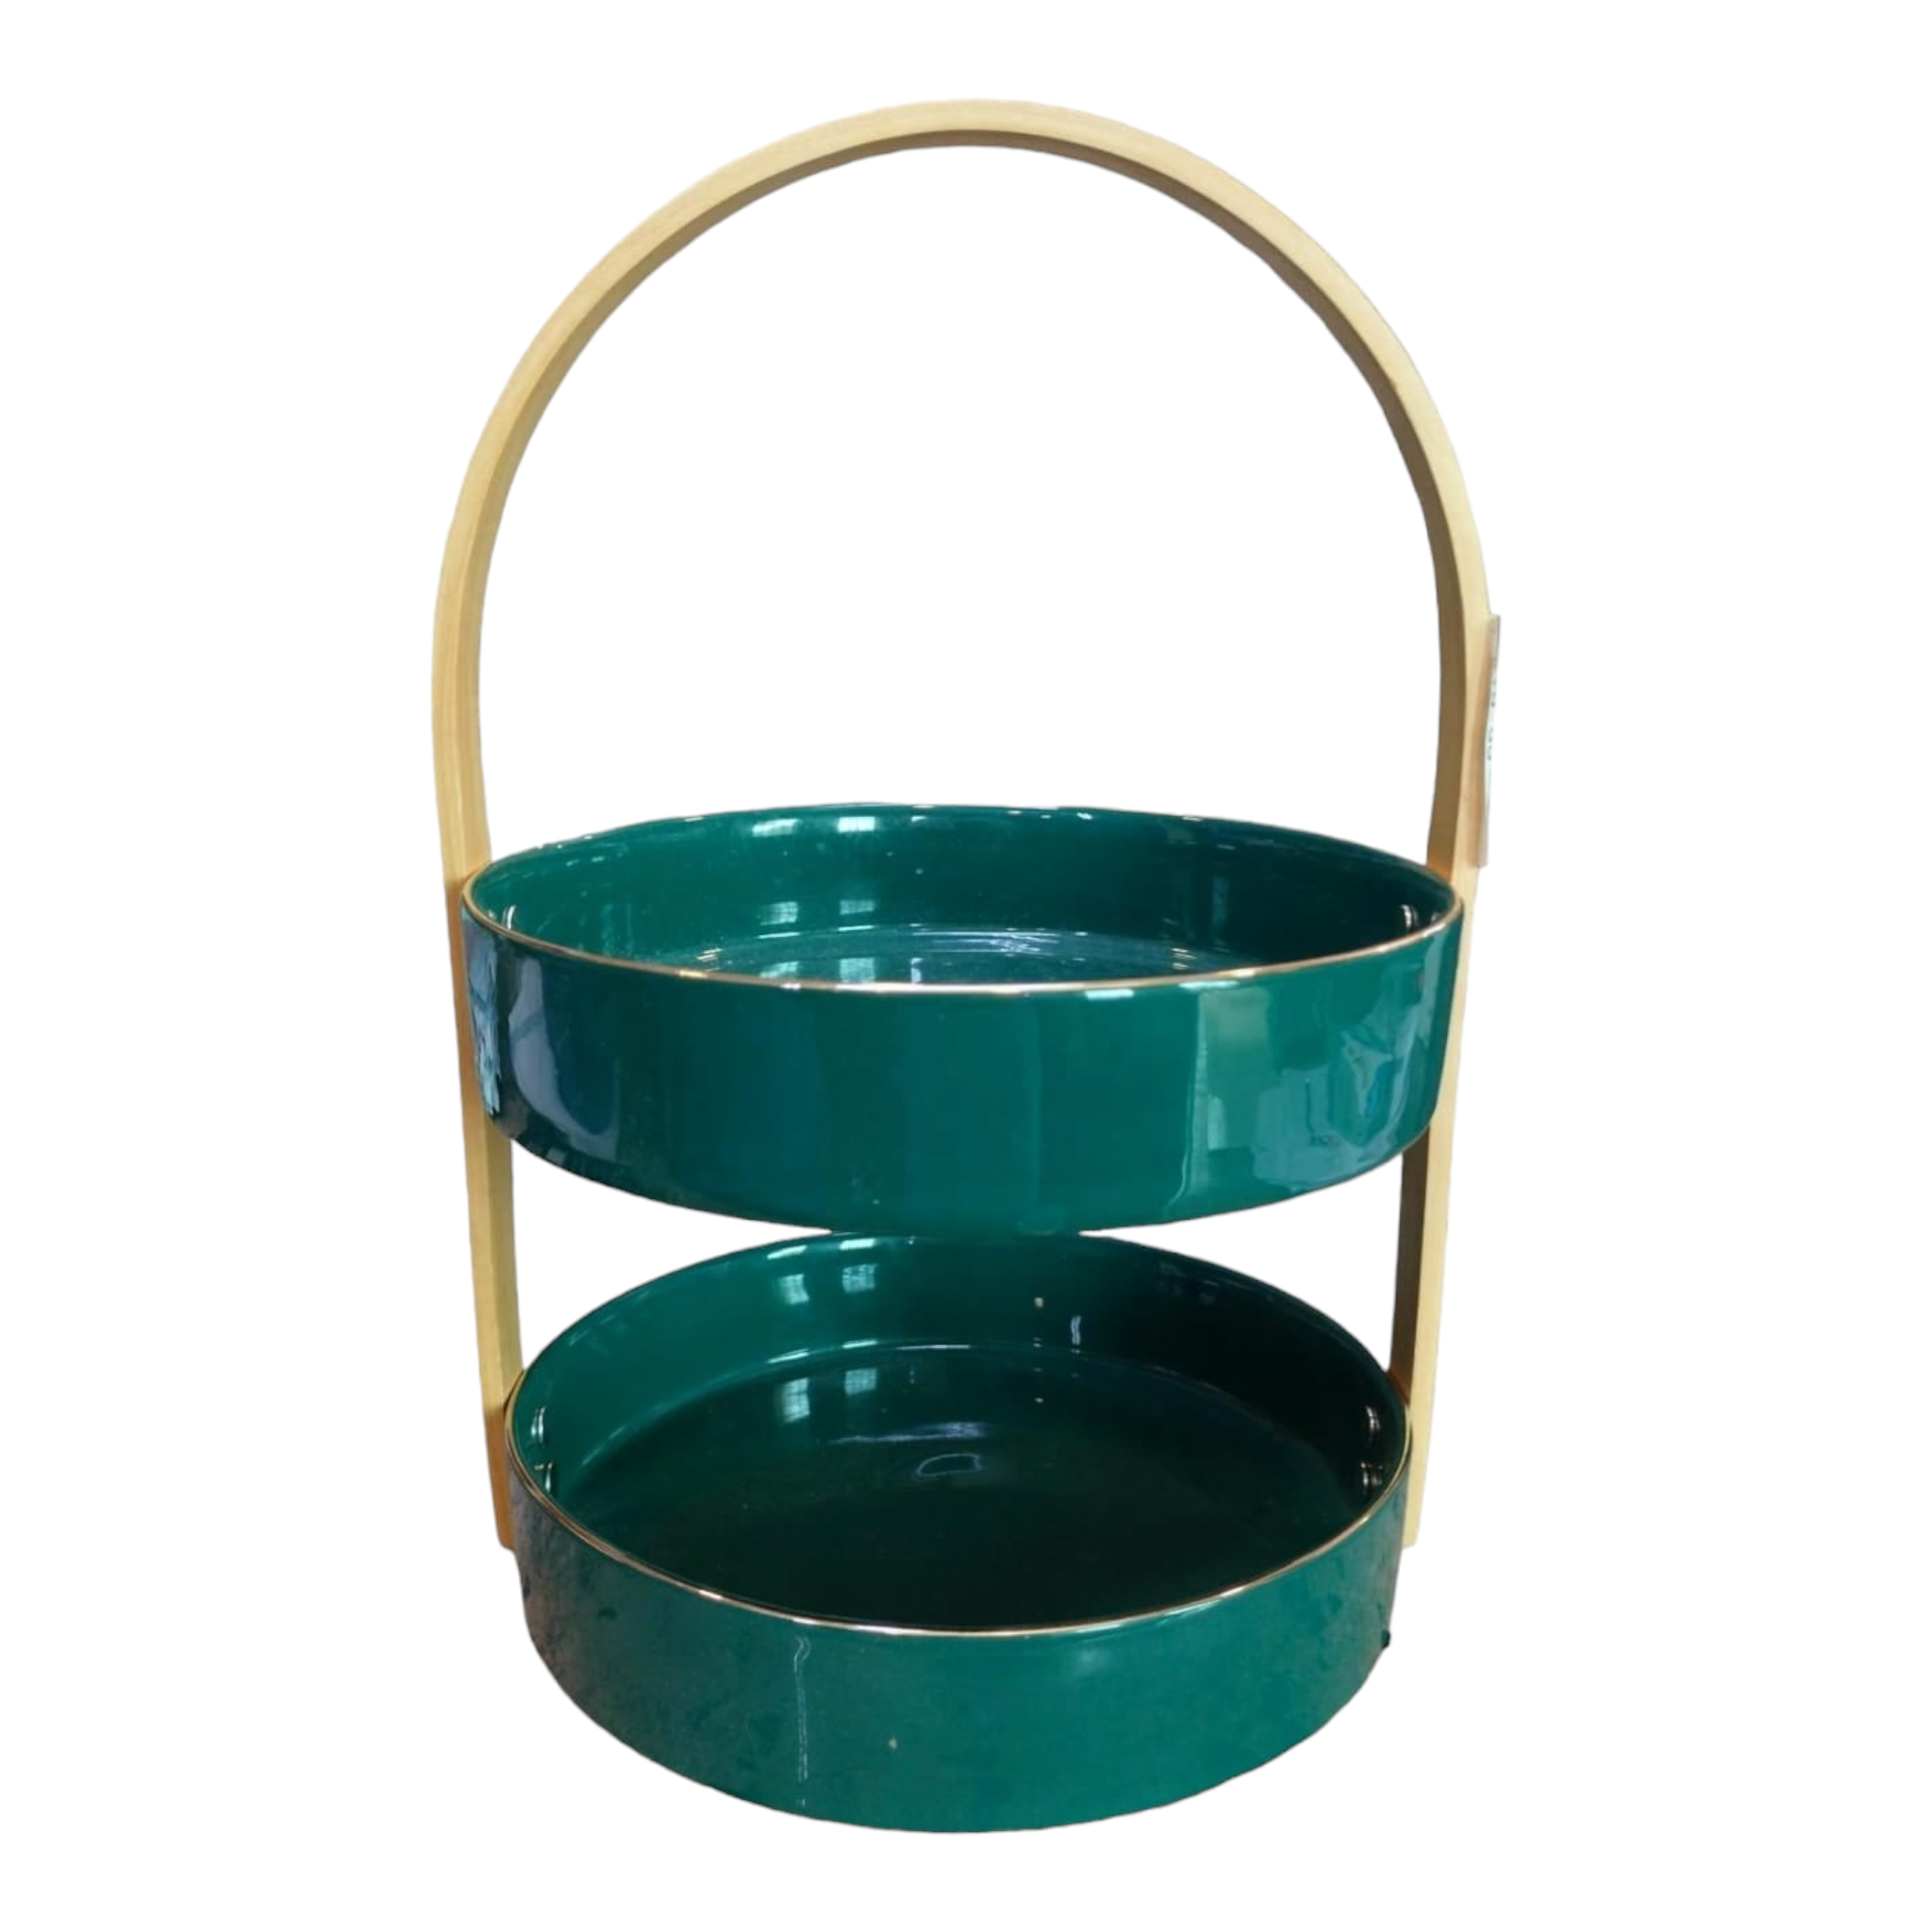 2-Tier Cake Fruit Stand Marble Green Oval Bowl Set with Natural Bamboo Frame